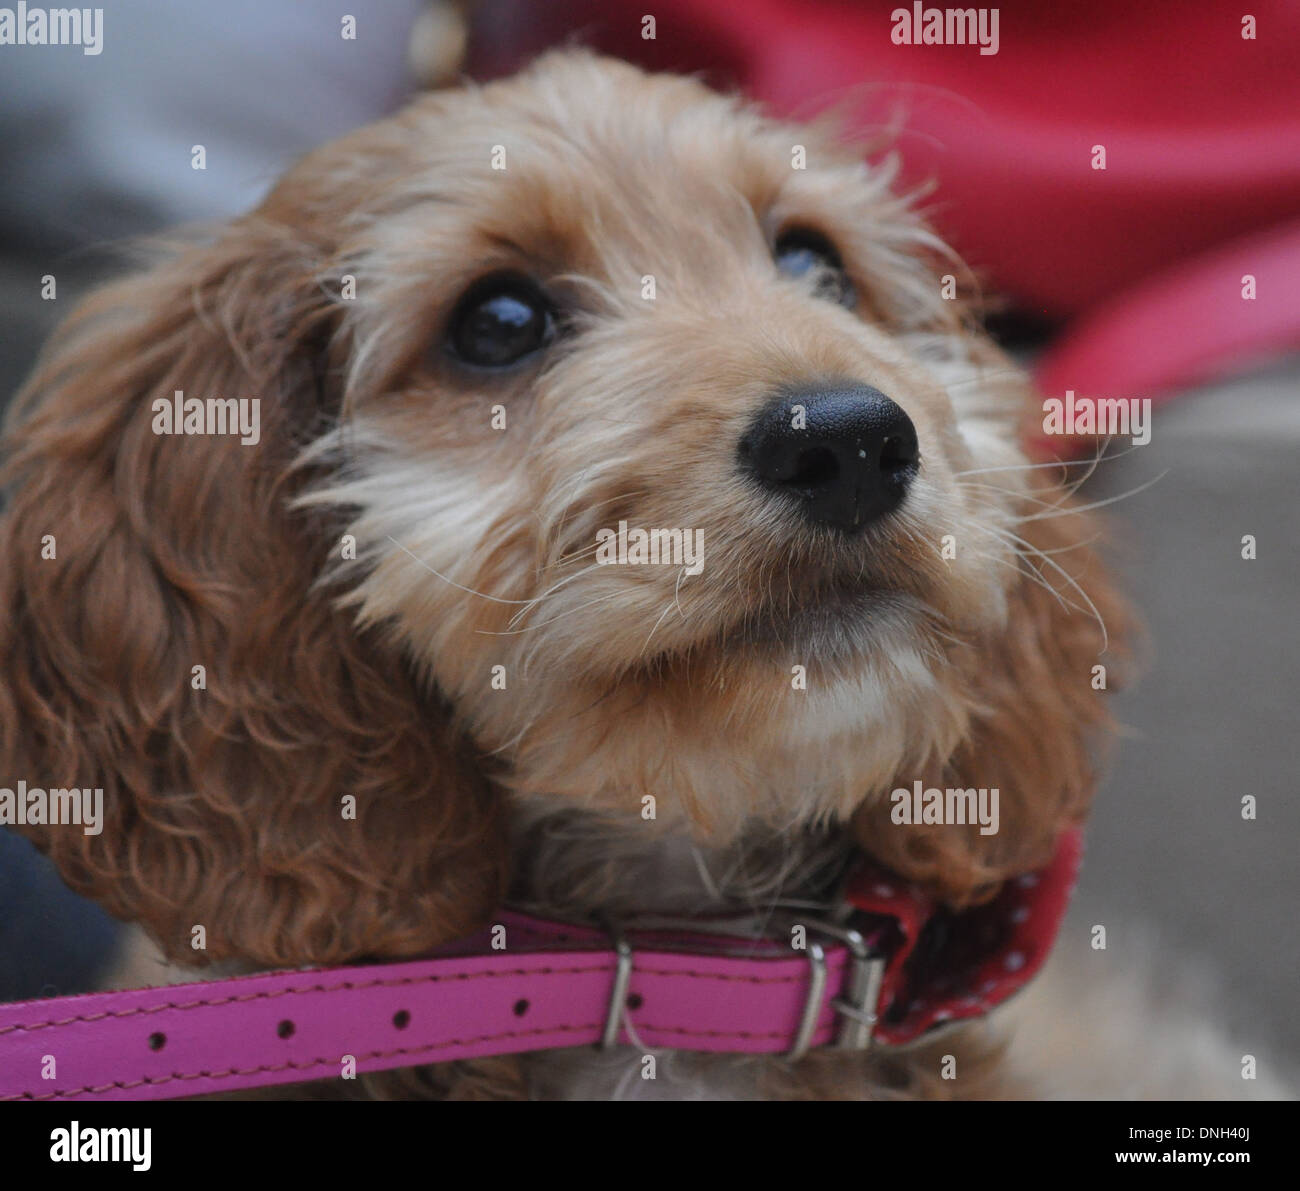 portrait of golden pet puppy dog looking up at camera with black eyes and pink dog collar Stock Photo